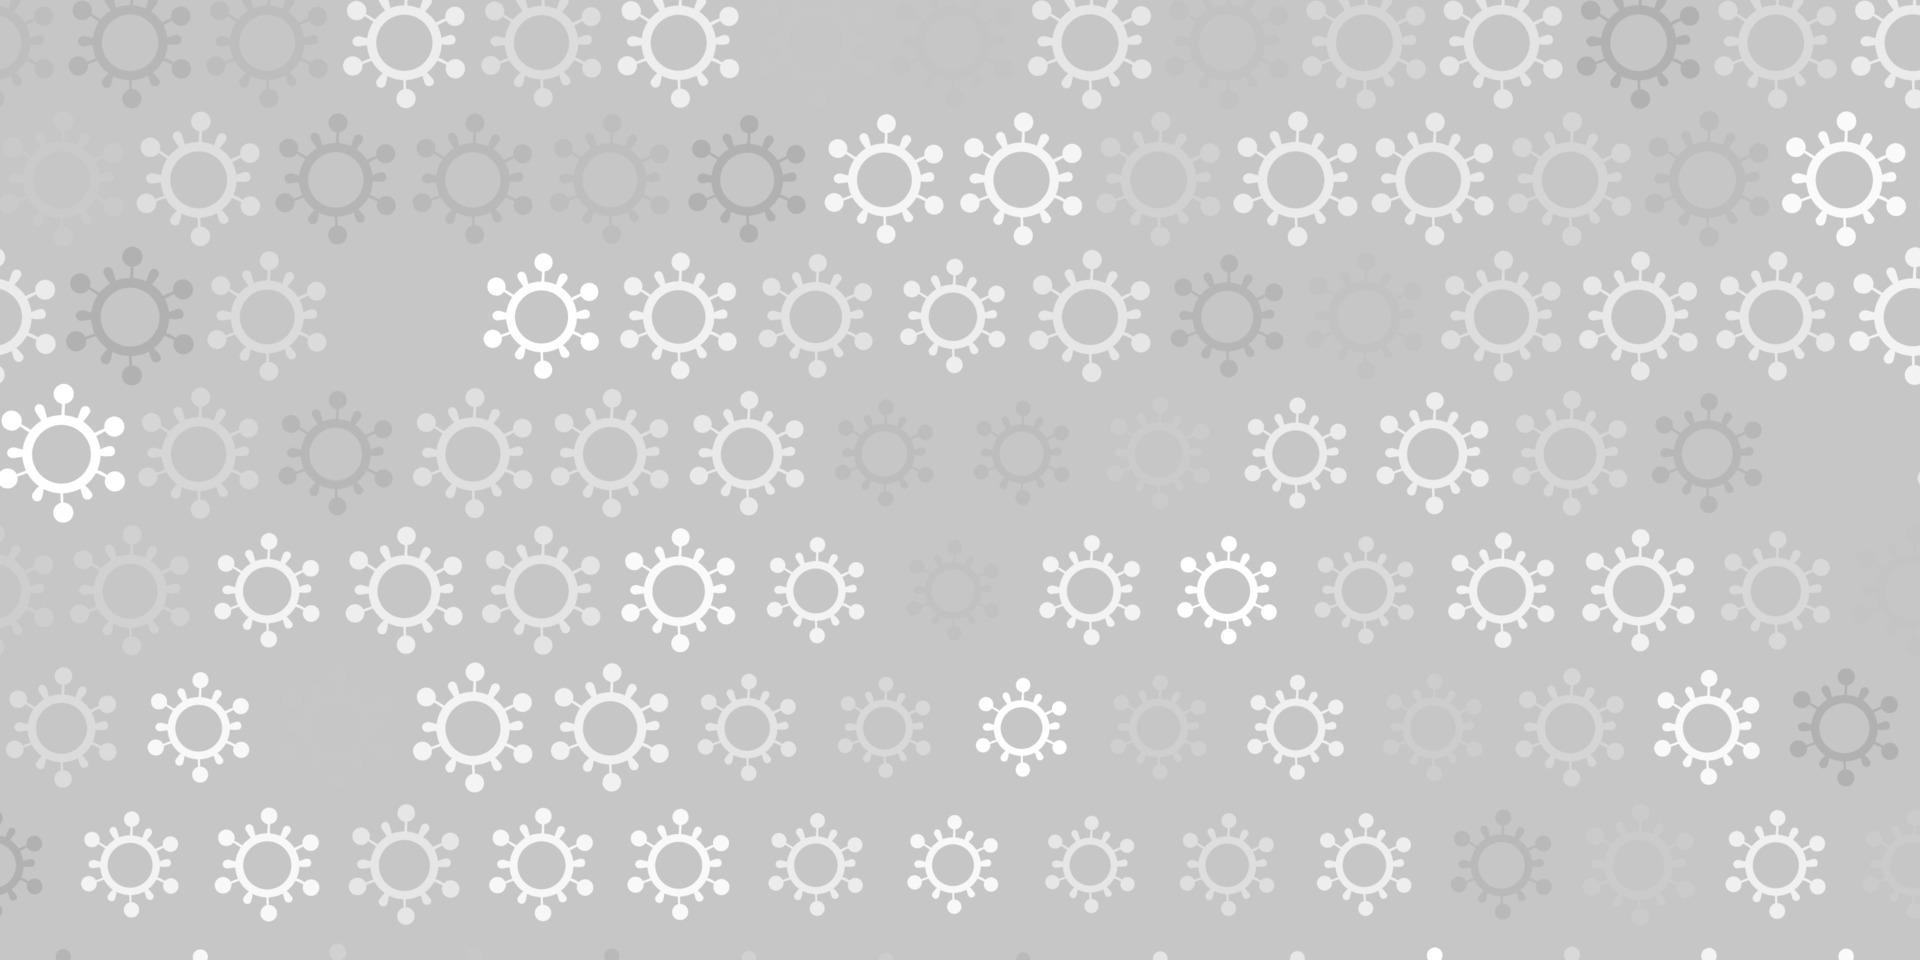 Light gray vector texture with disease symbols.